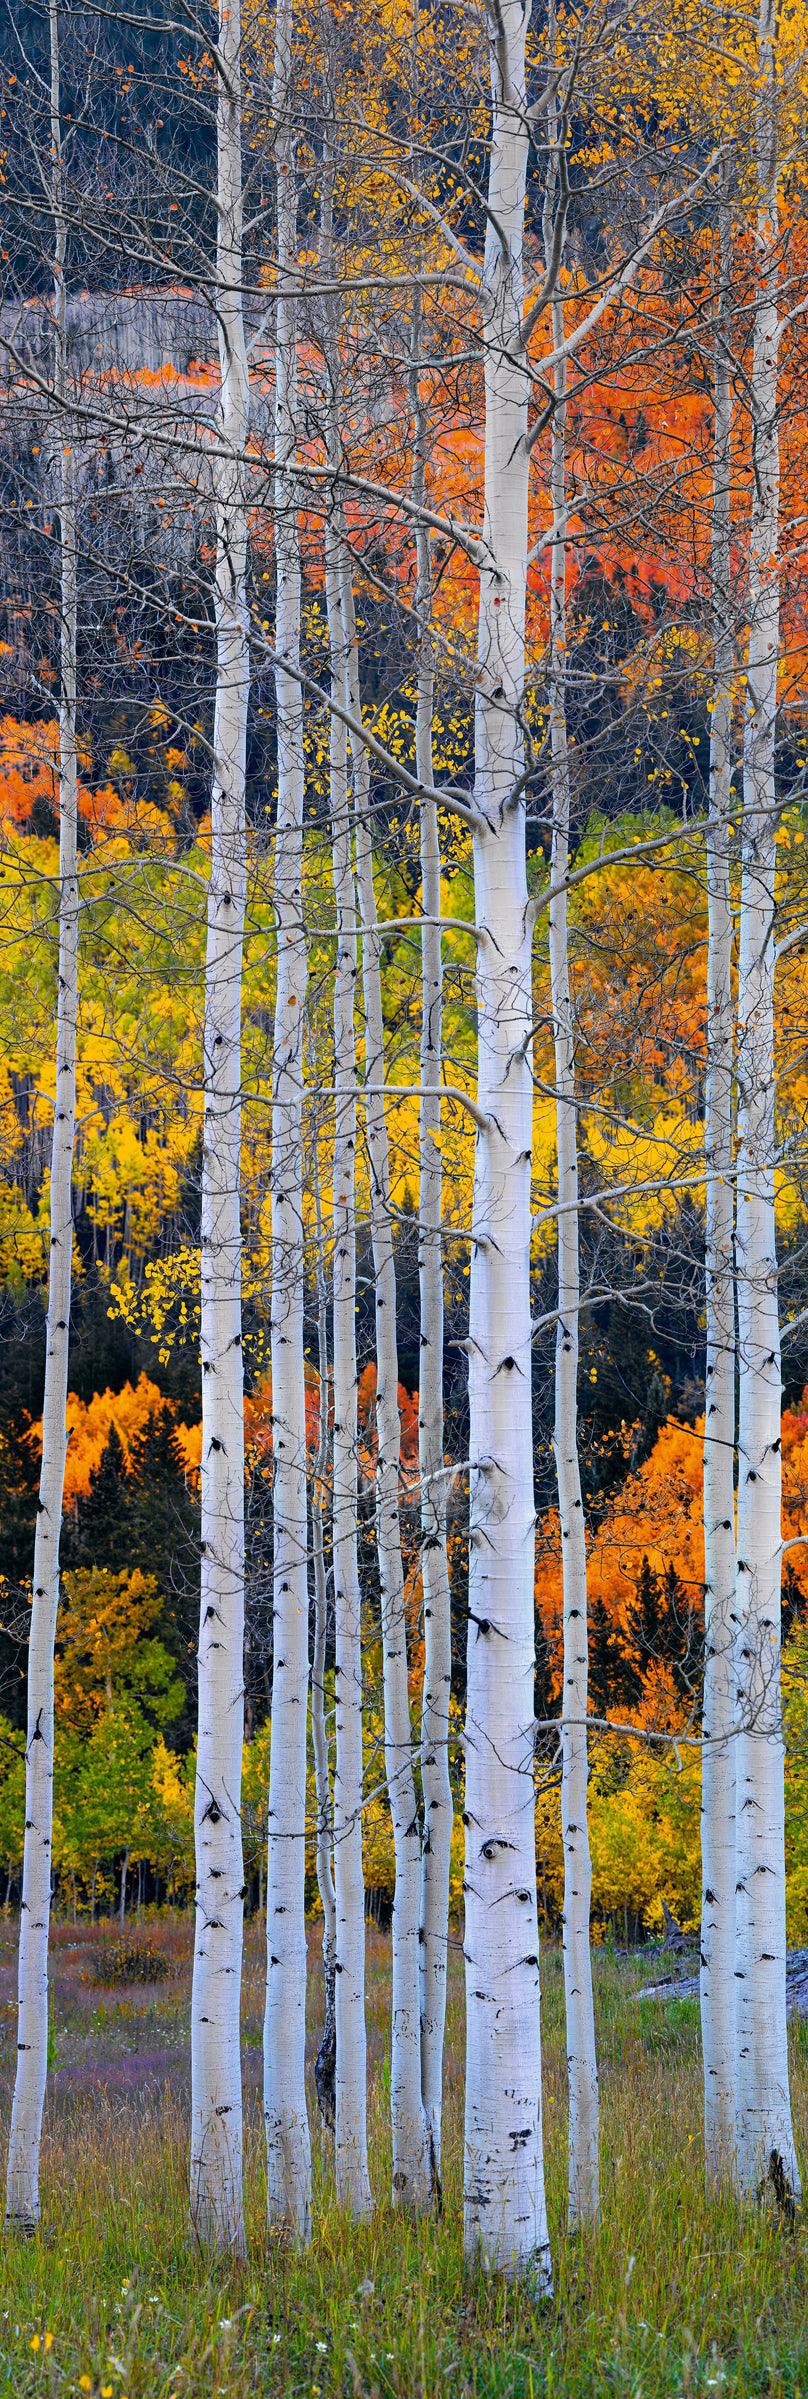 Section of white birch trees in a grass field surrounded by an Autumn colored forest in Aspen Colorado